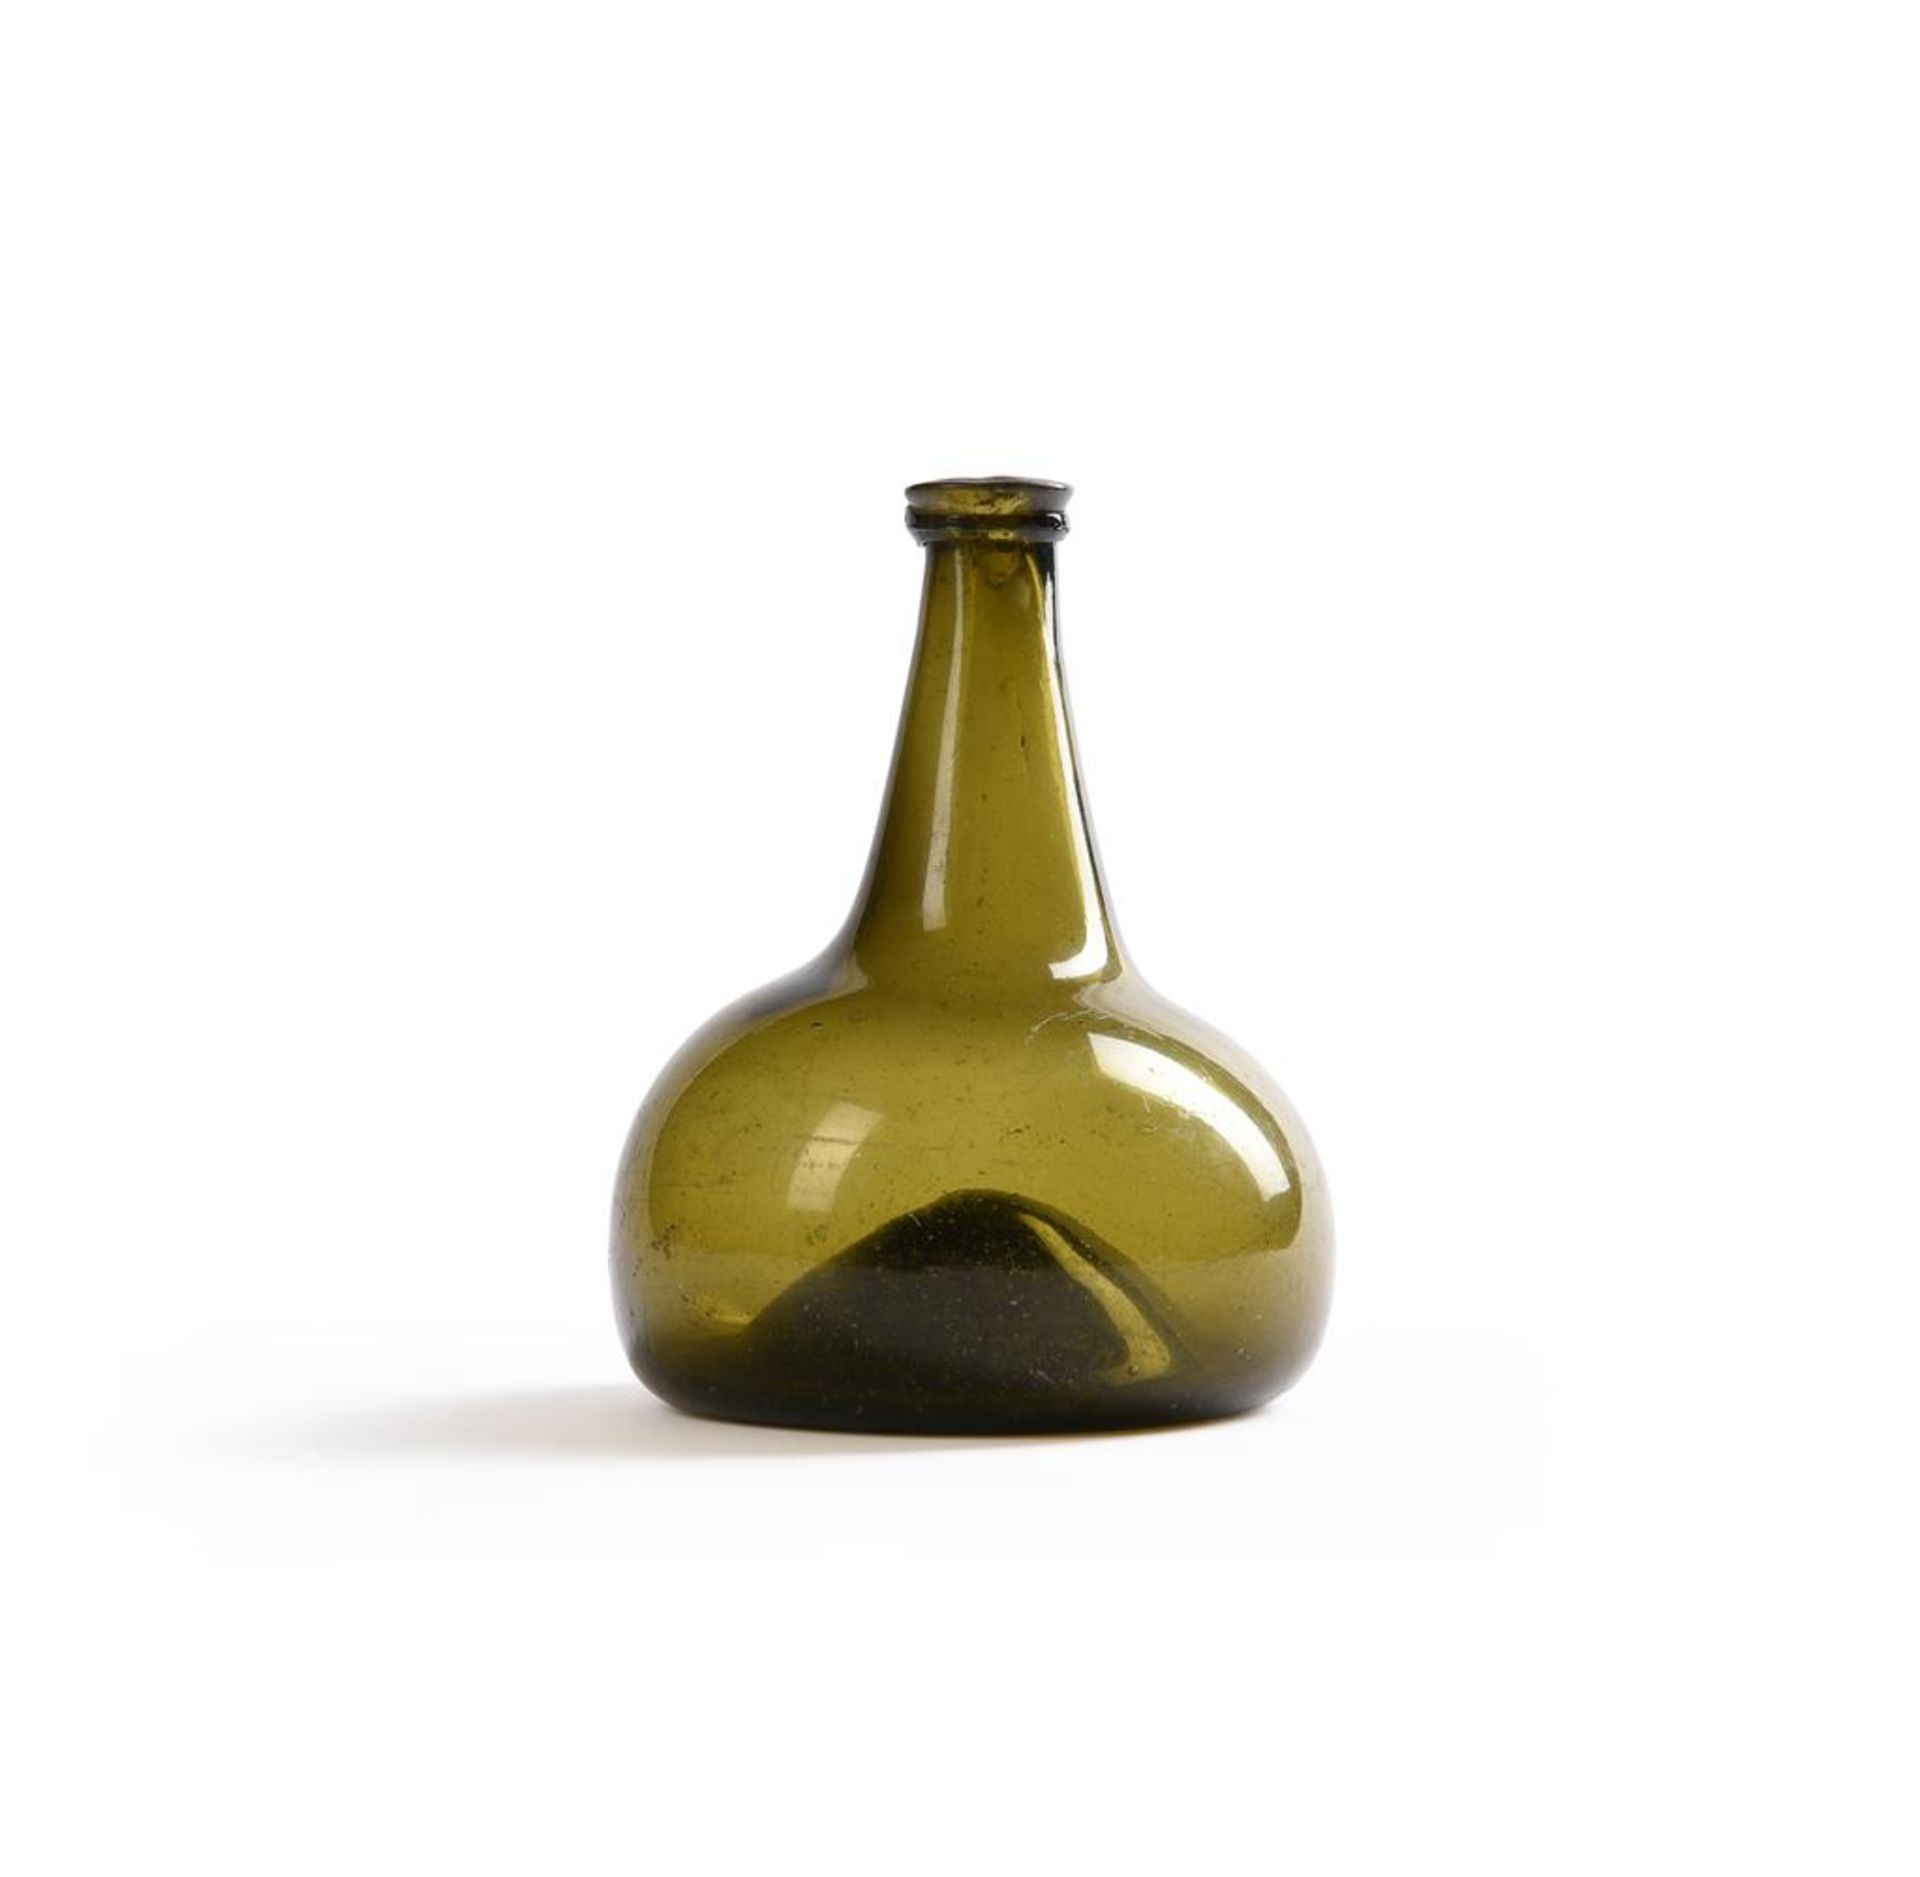 AN OLIVE-GREEN TINT 'ONION' WINE BOTTLE, EARLY 18TH CENTURY